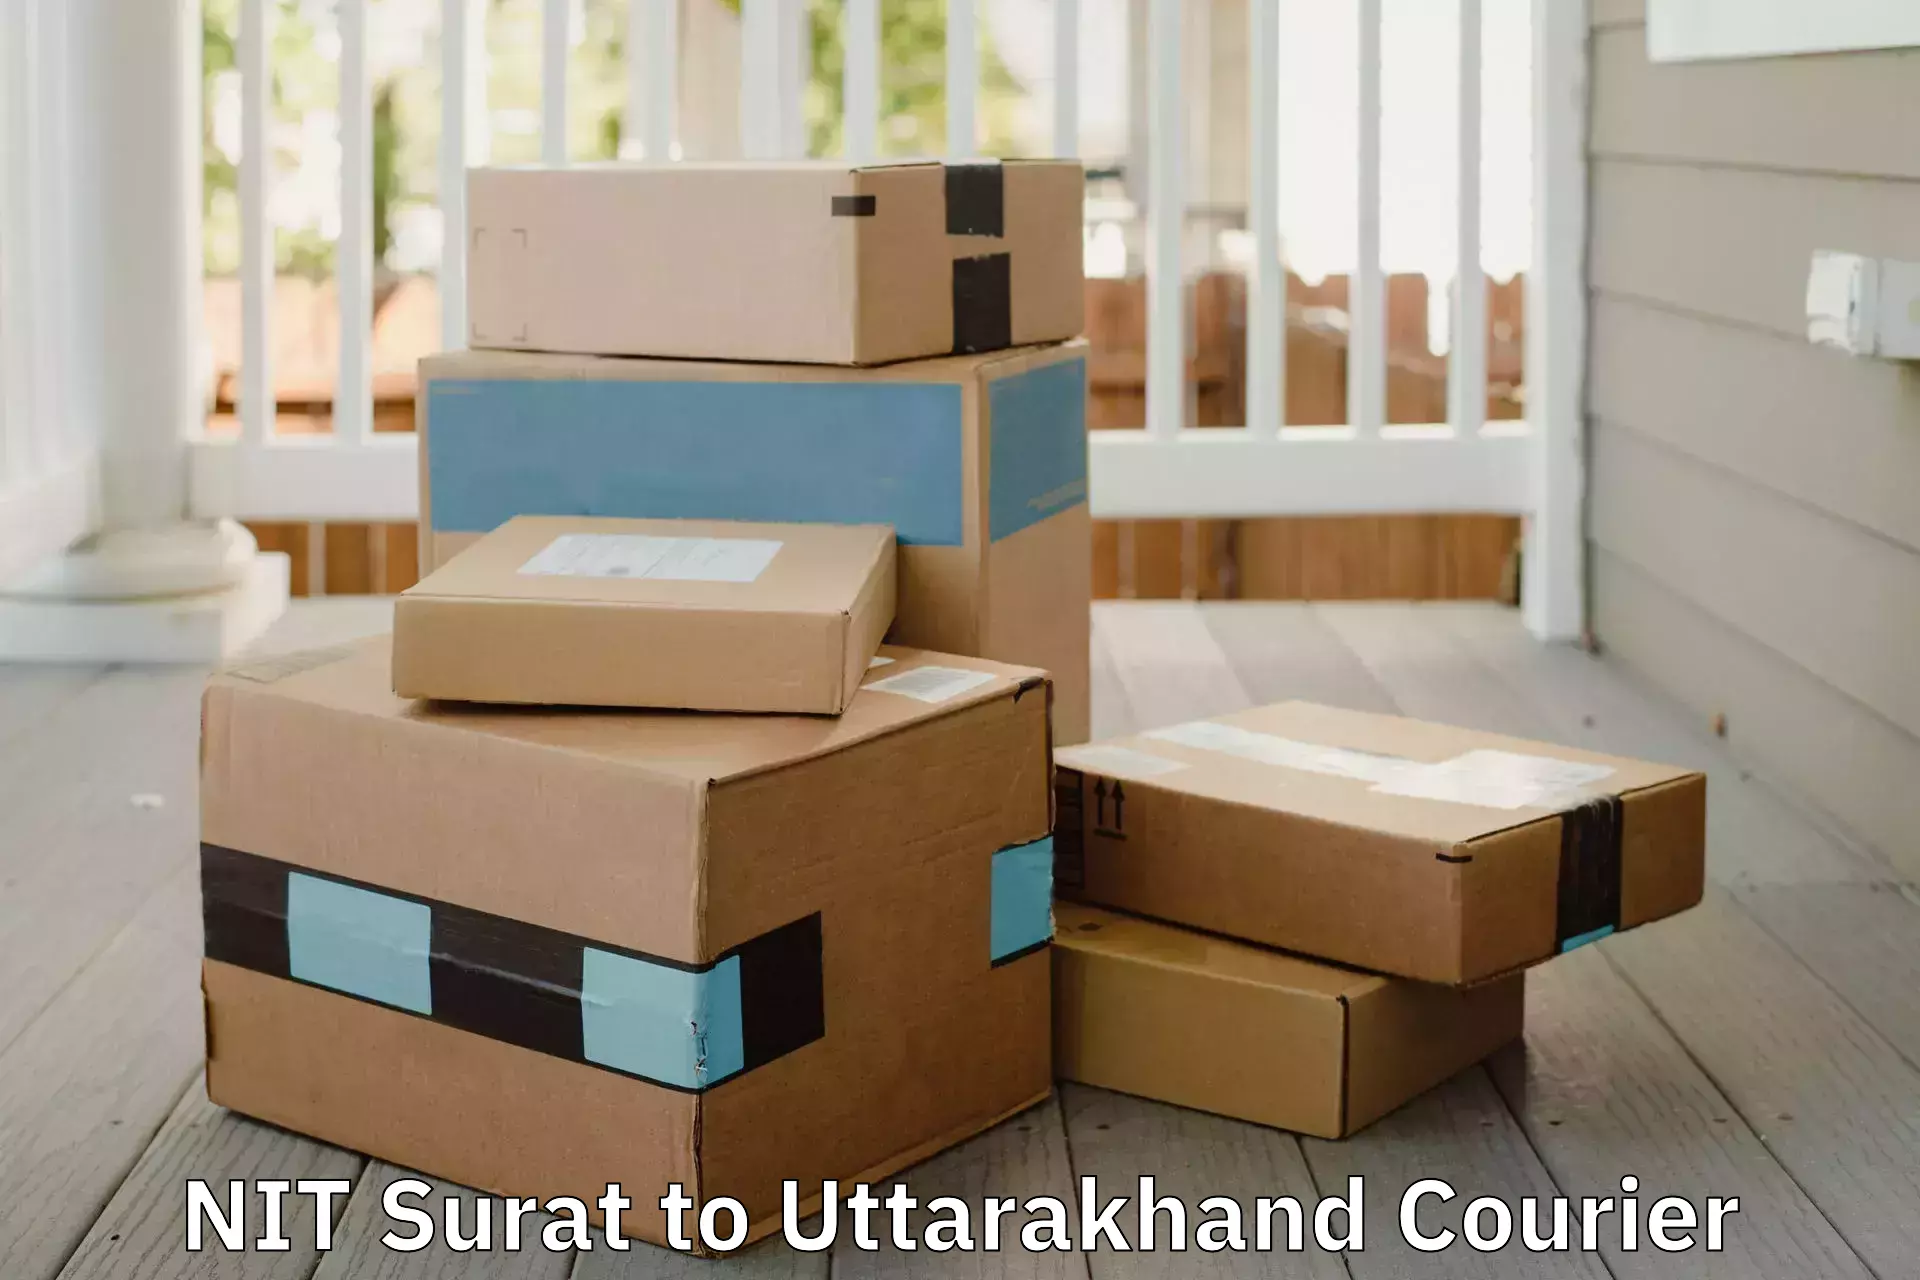 Professional packing services NIT Surat to Uttarakhand